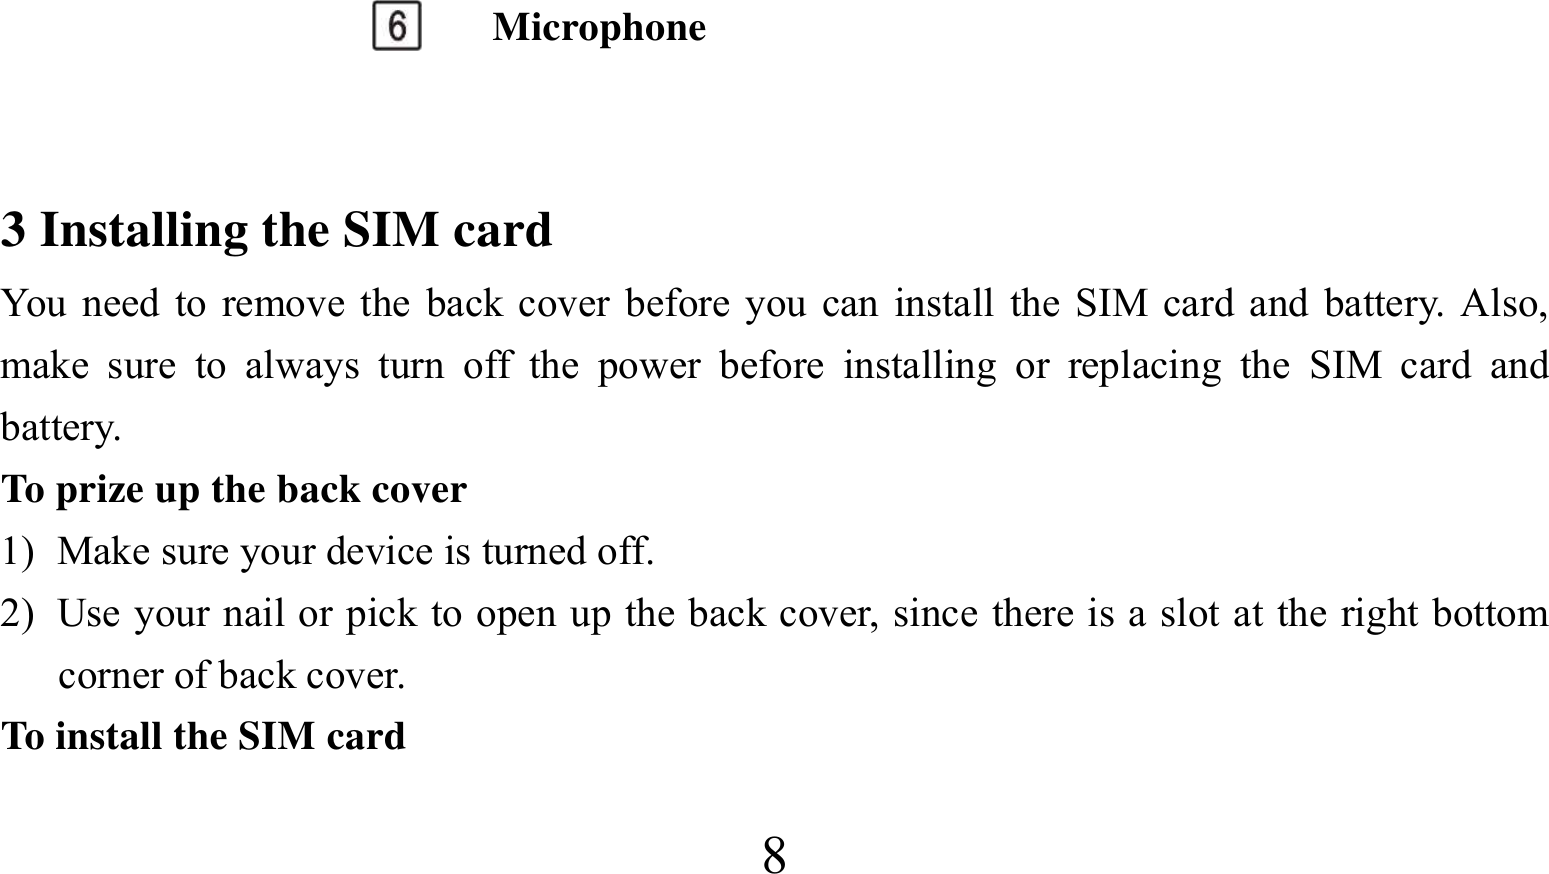  8 Microphone  3 Installing the SIM card You need to remove the back cover before you can install the SIM card and battery. Also, make sure to always turn off the power before installing or replacing the SIM card and battery. To prize up the back cover   1) Make sure your device is turned off. 2) Use your nail or pick to open up the back cover, since there is a slot at the right bottom corner of back cover. To install the SIM card 